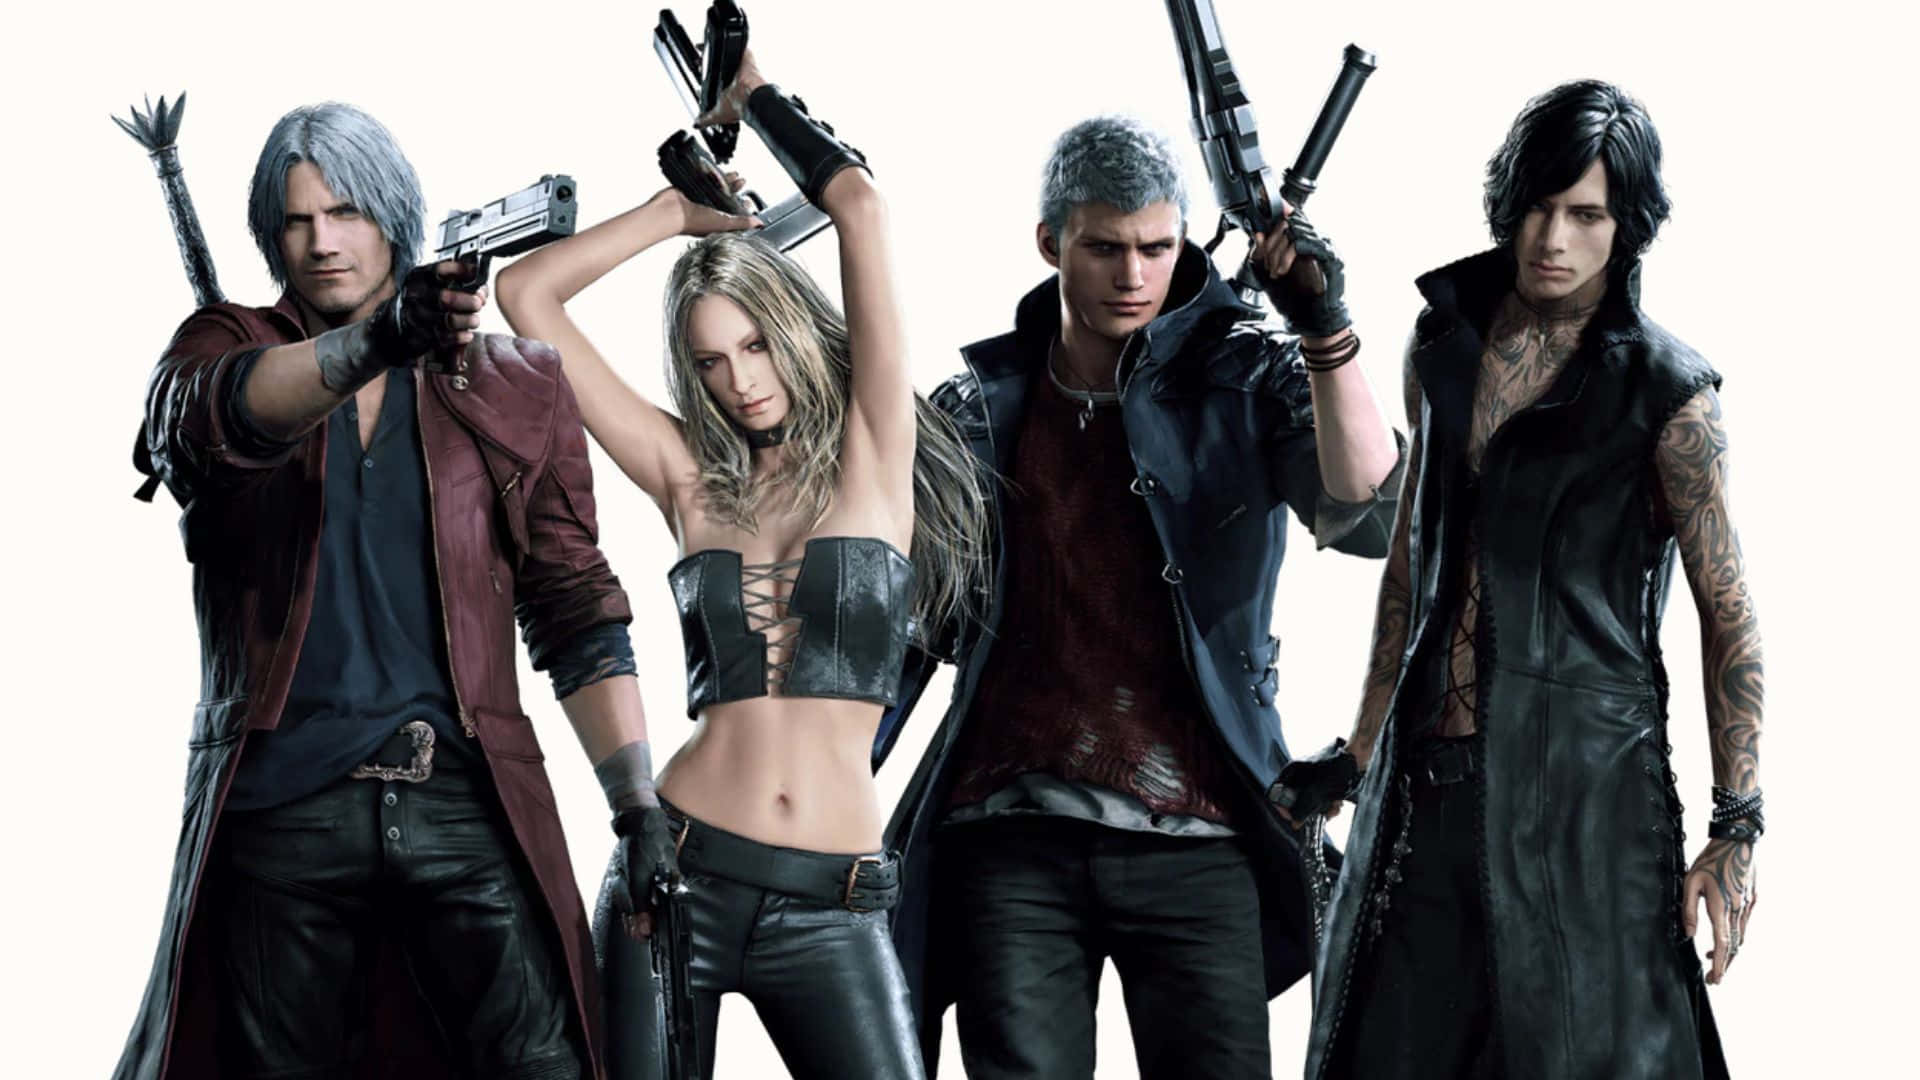 An Action-filled Scene From The Popular Game, Devil May Cry (dmc). Wallpaper